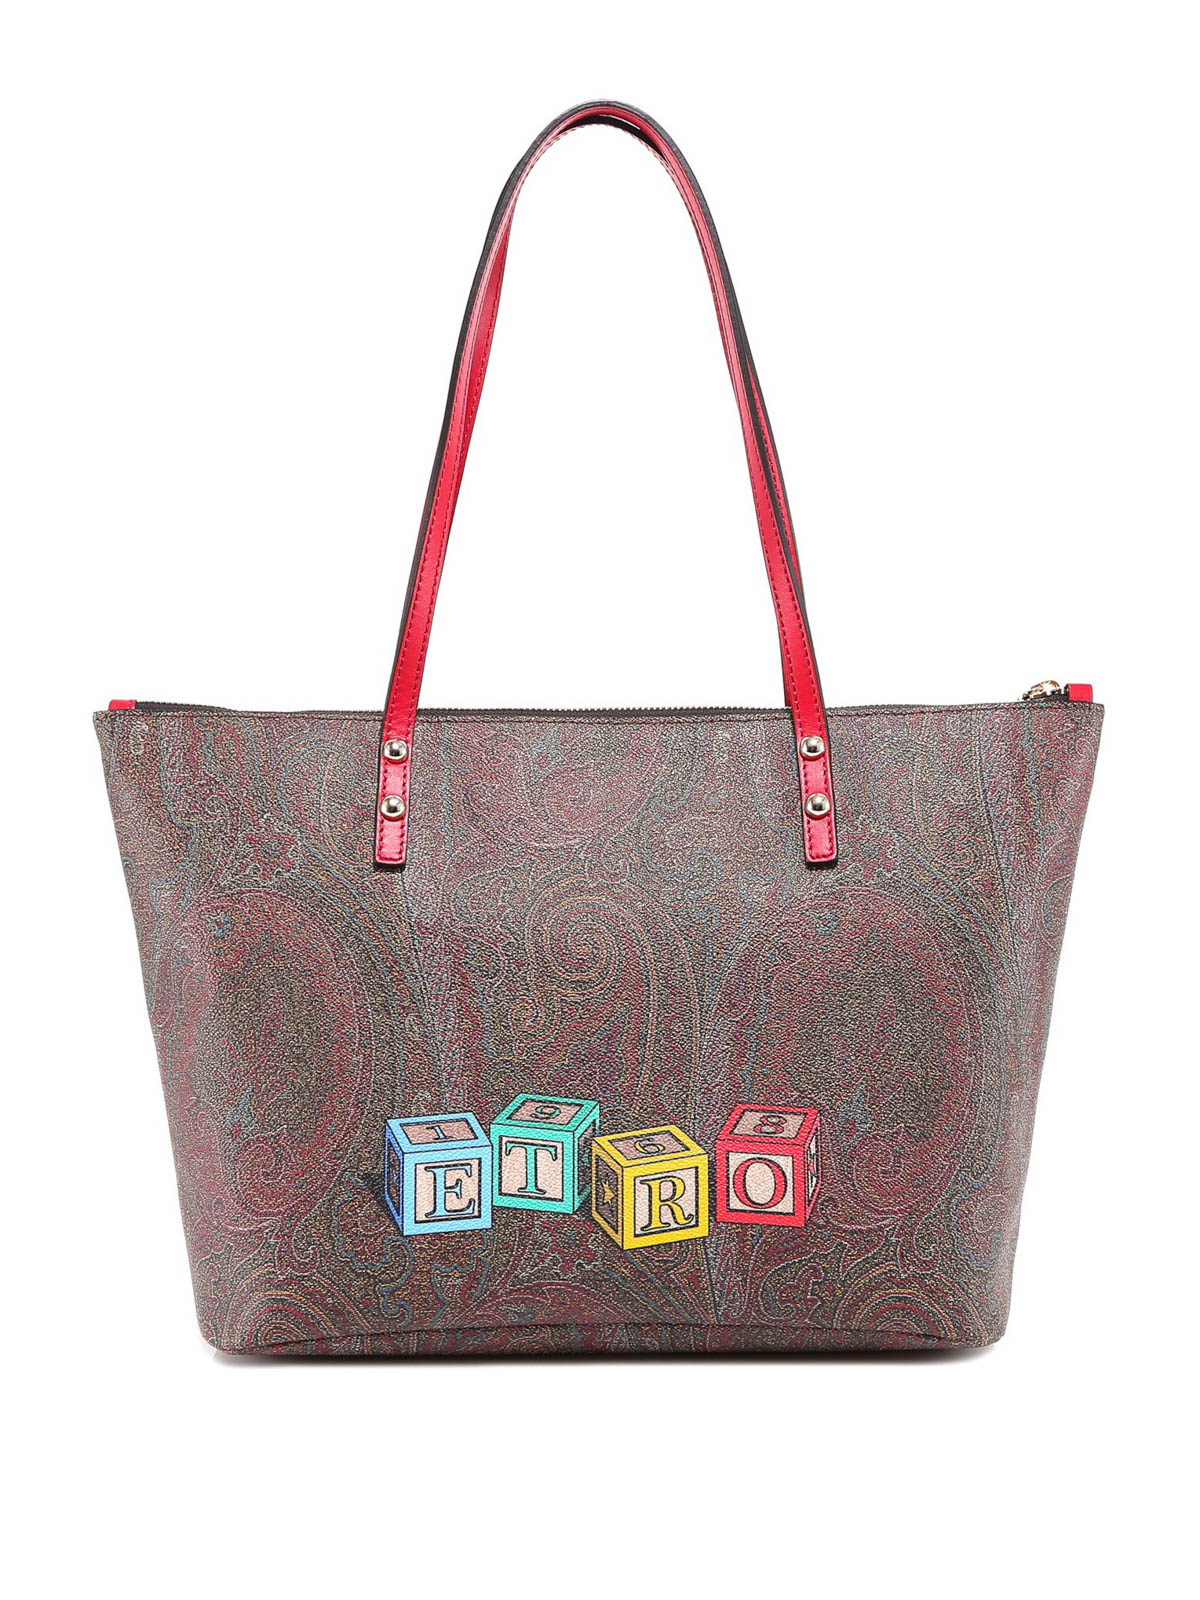 Etro - Toys large tote - totes bags - 1N0222426602 | Shop online at iKRIX